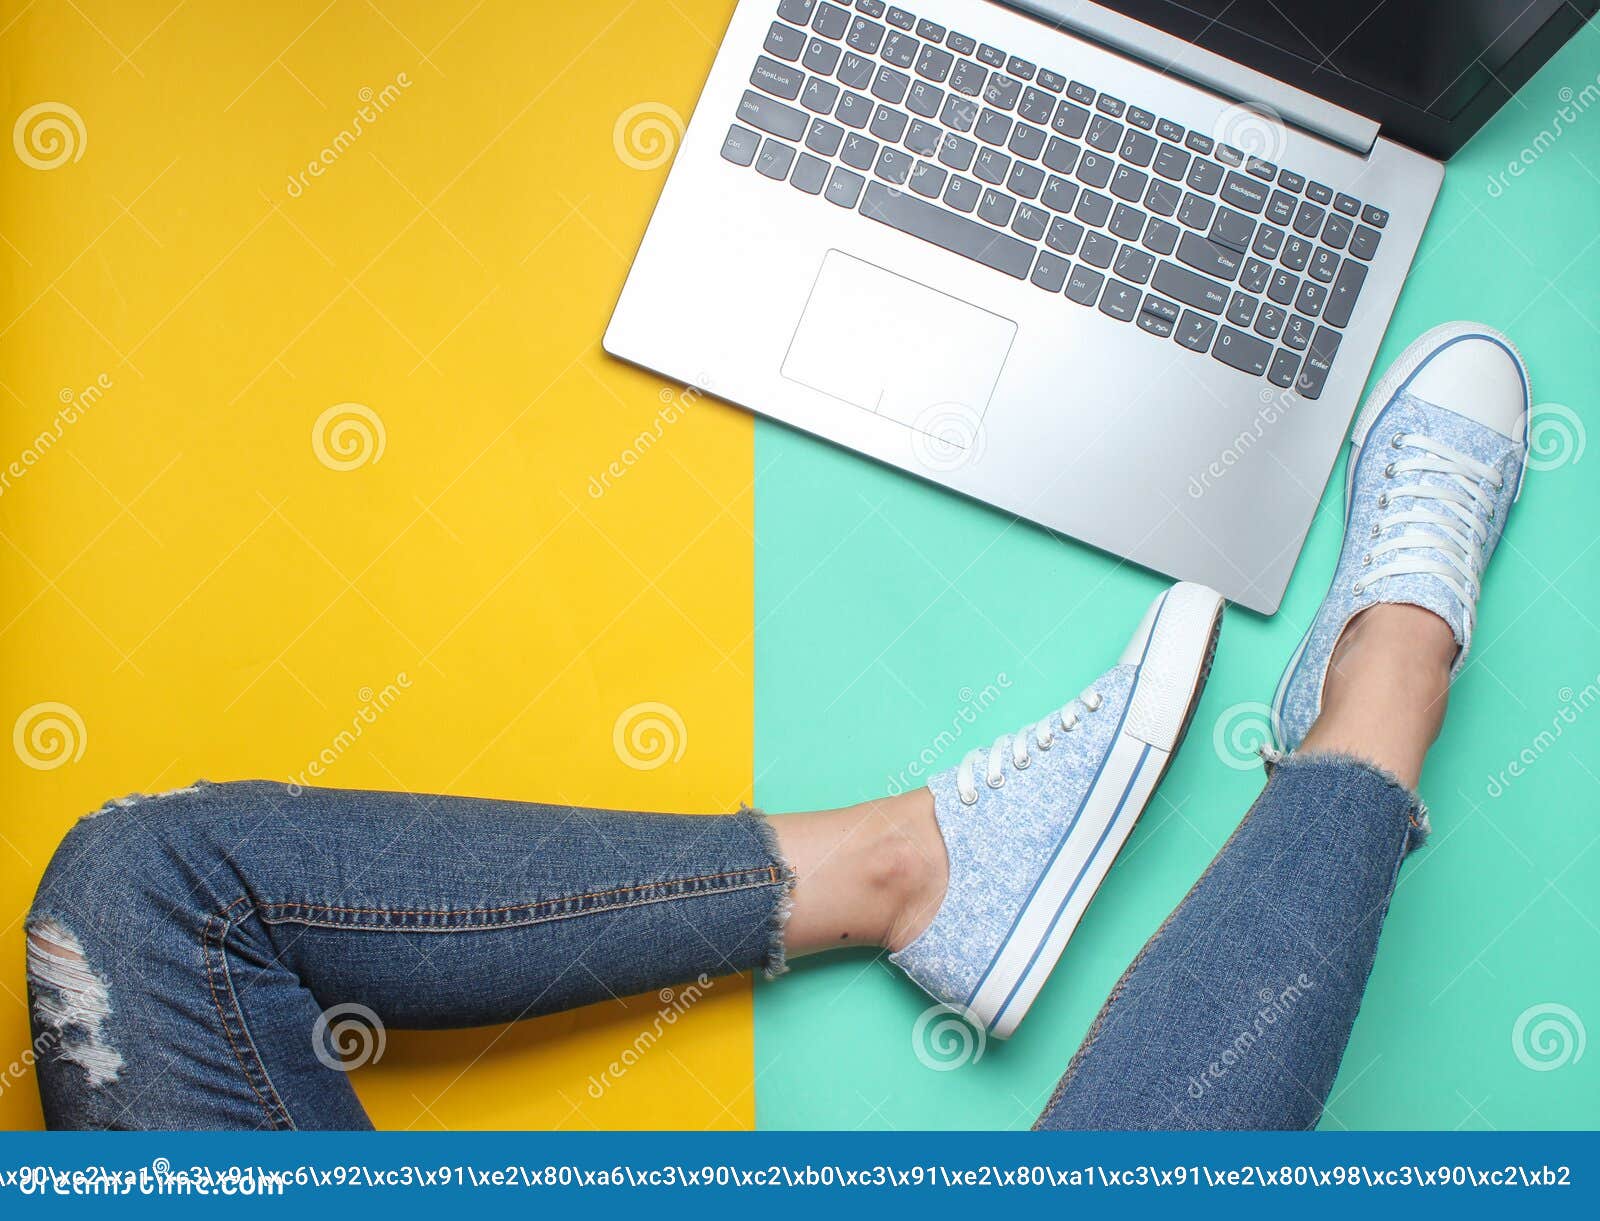 Laptop, Female Legs in Jeans and Sneakers on a Colored Pastel ...